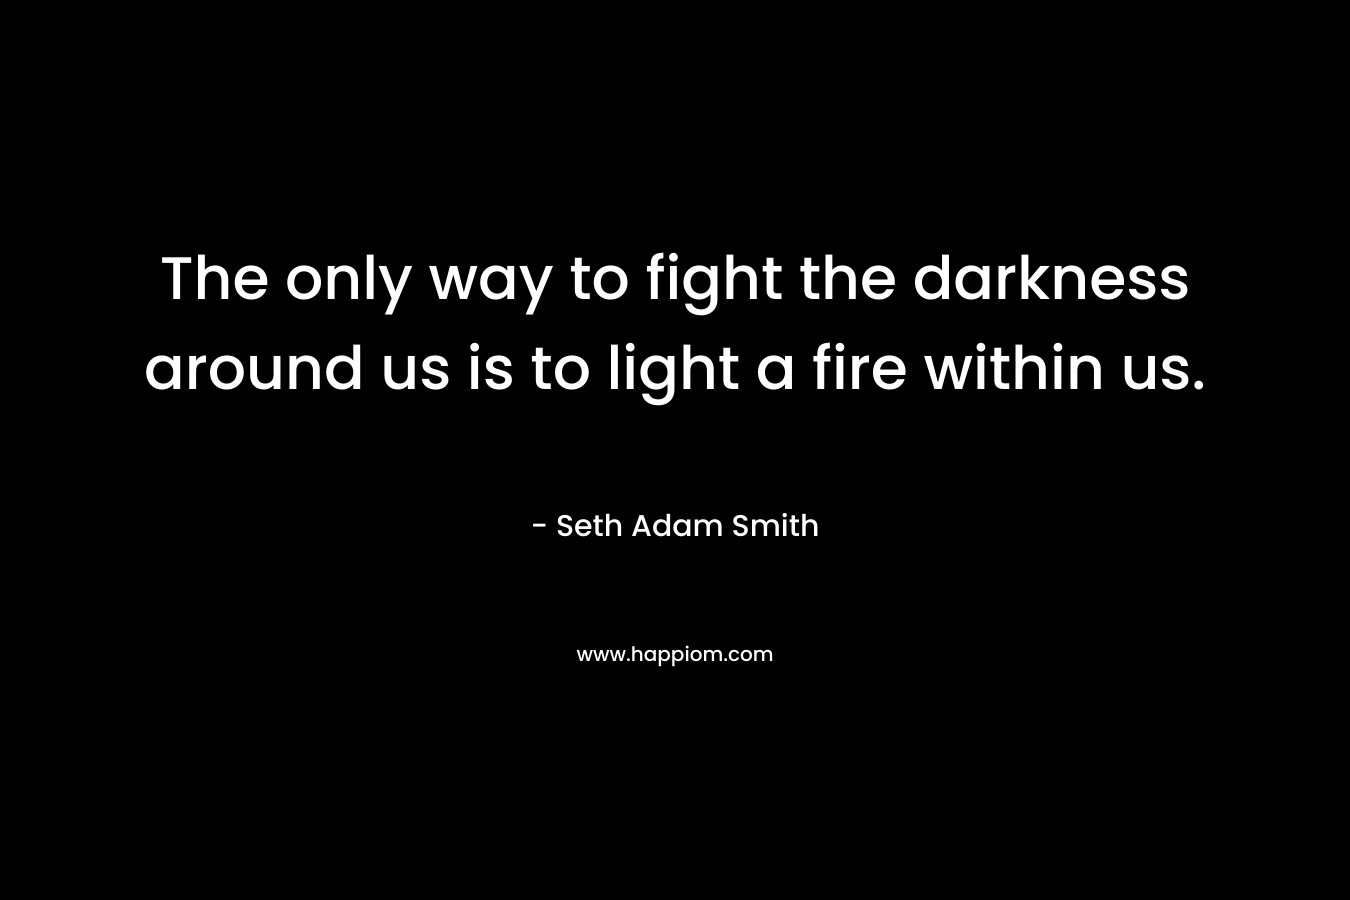 The only way to fight the darkness around us is to light a fire within us.